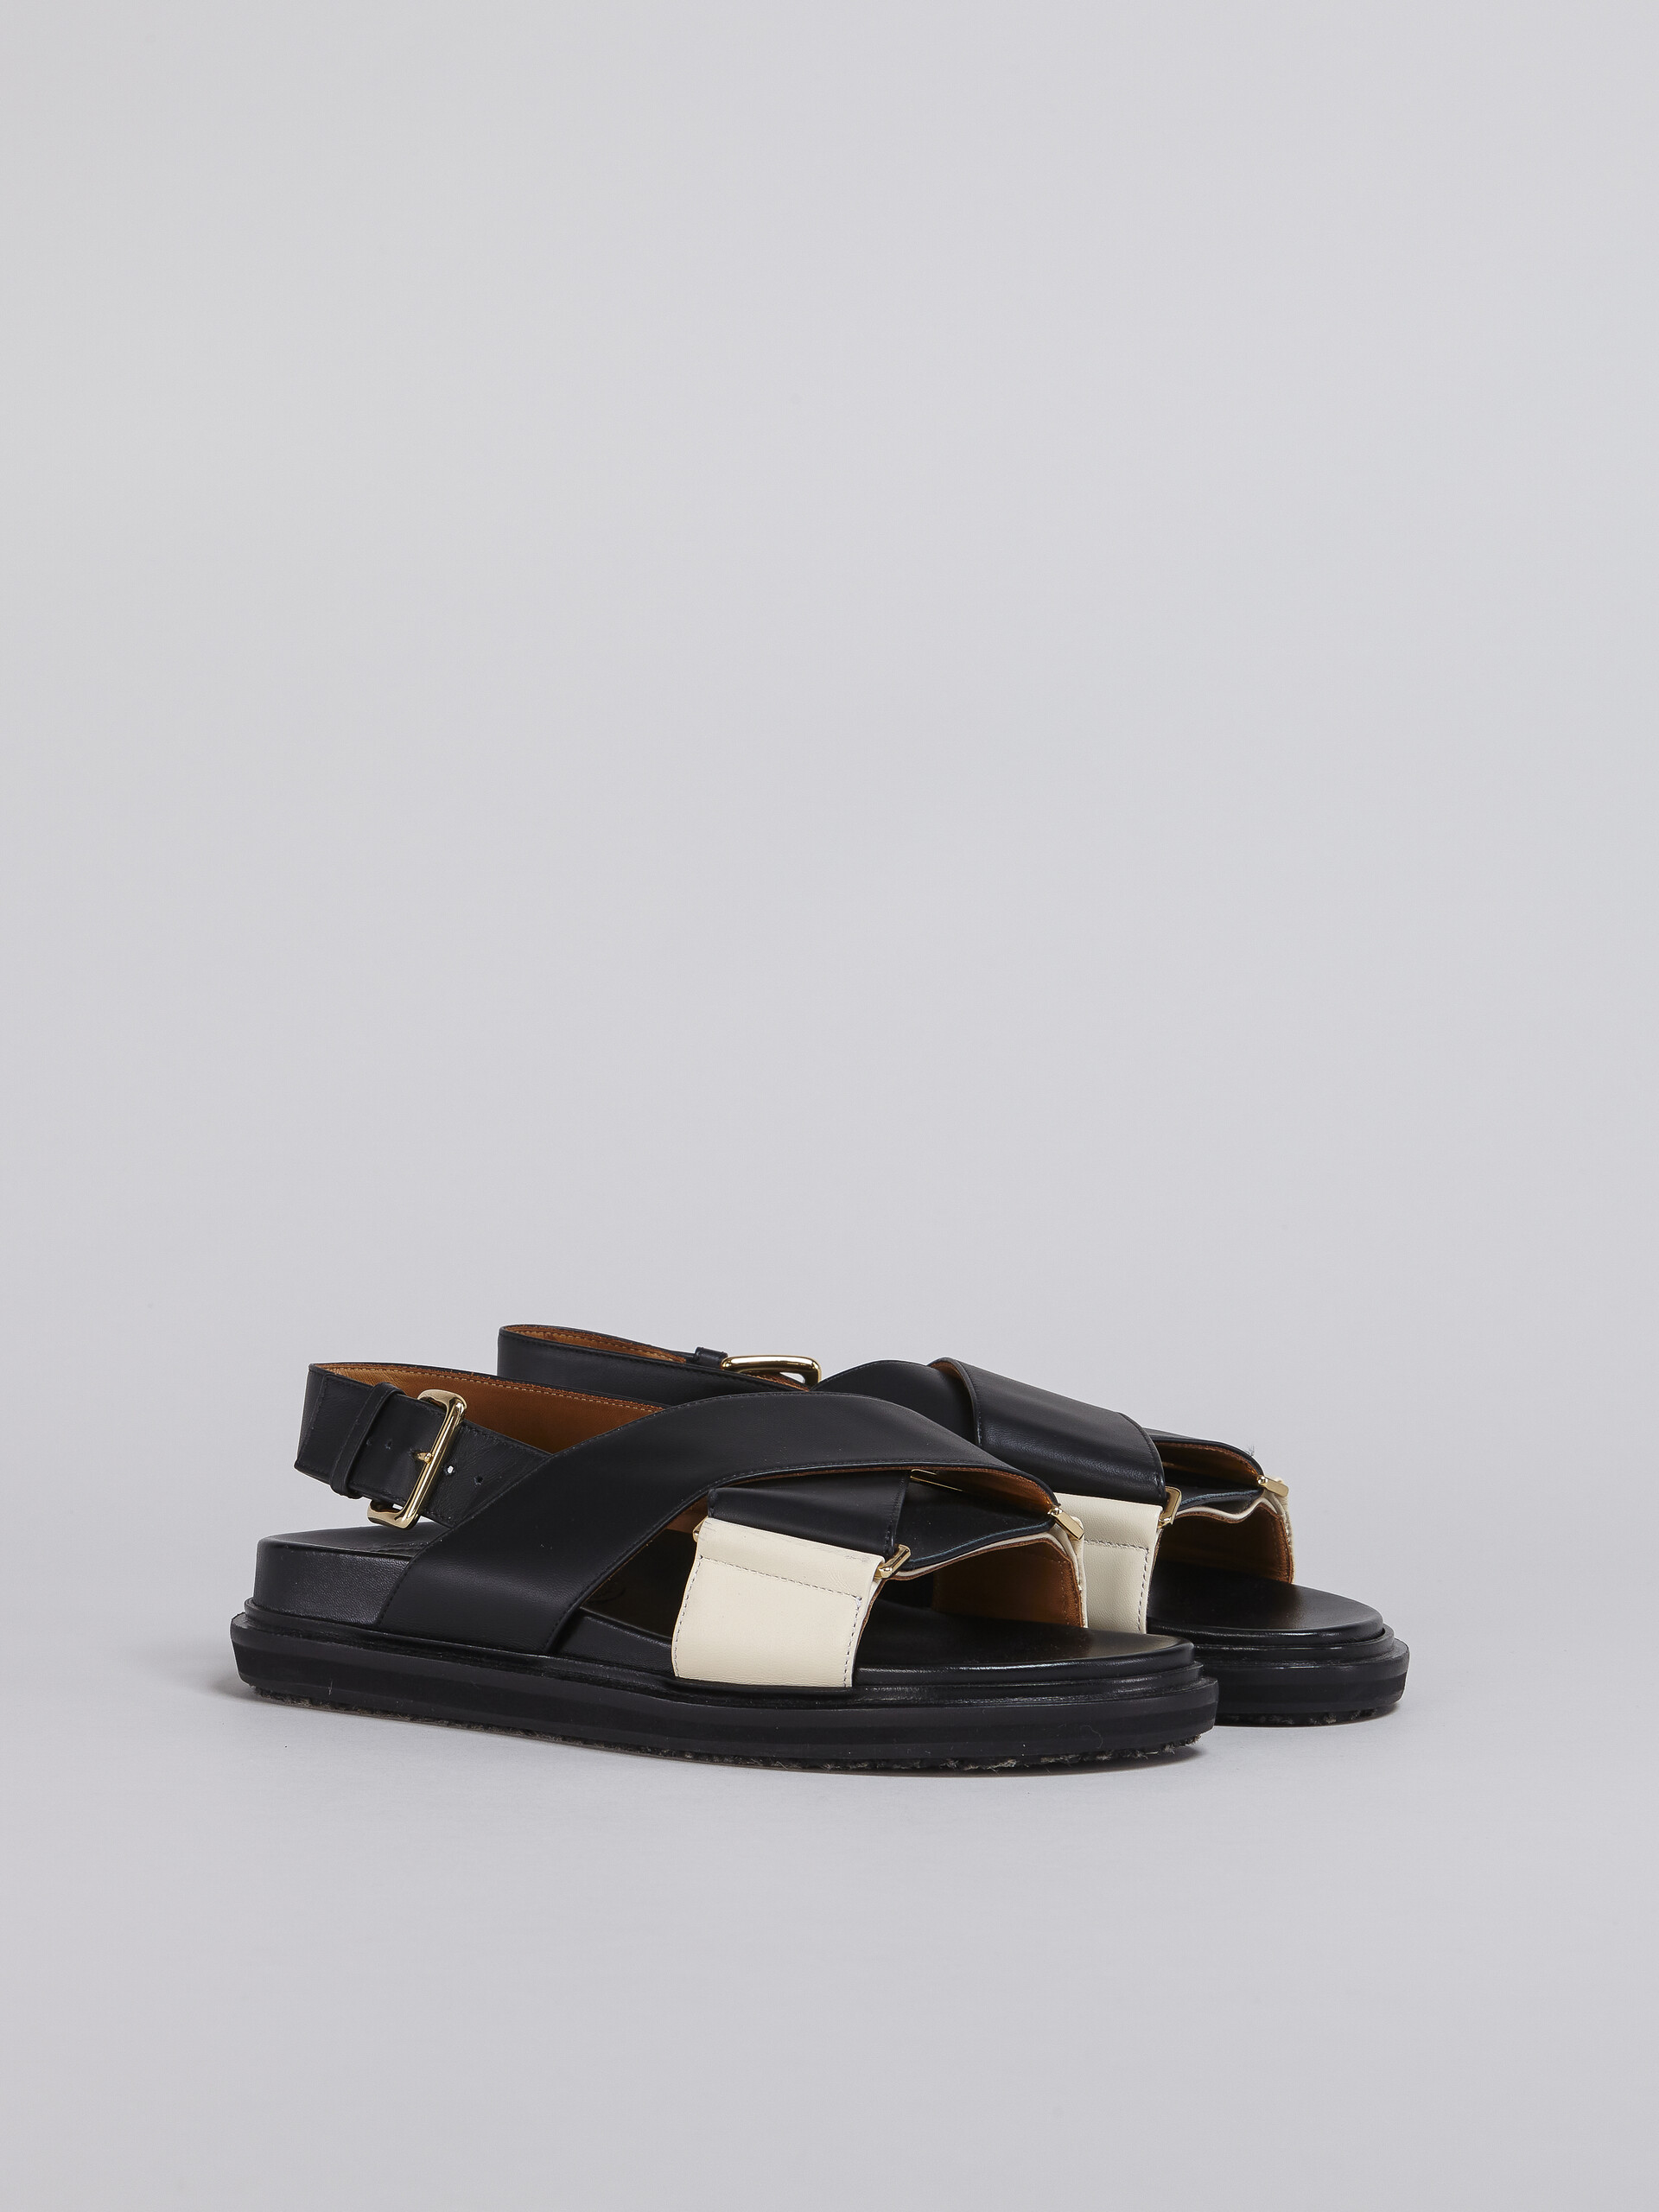 Black and white leather Fussbett - Sandals - Image 2